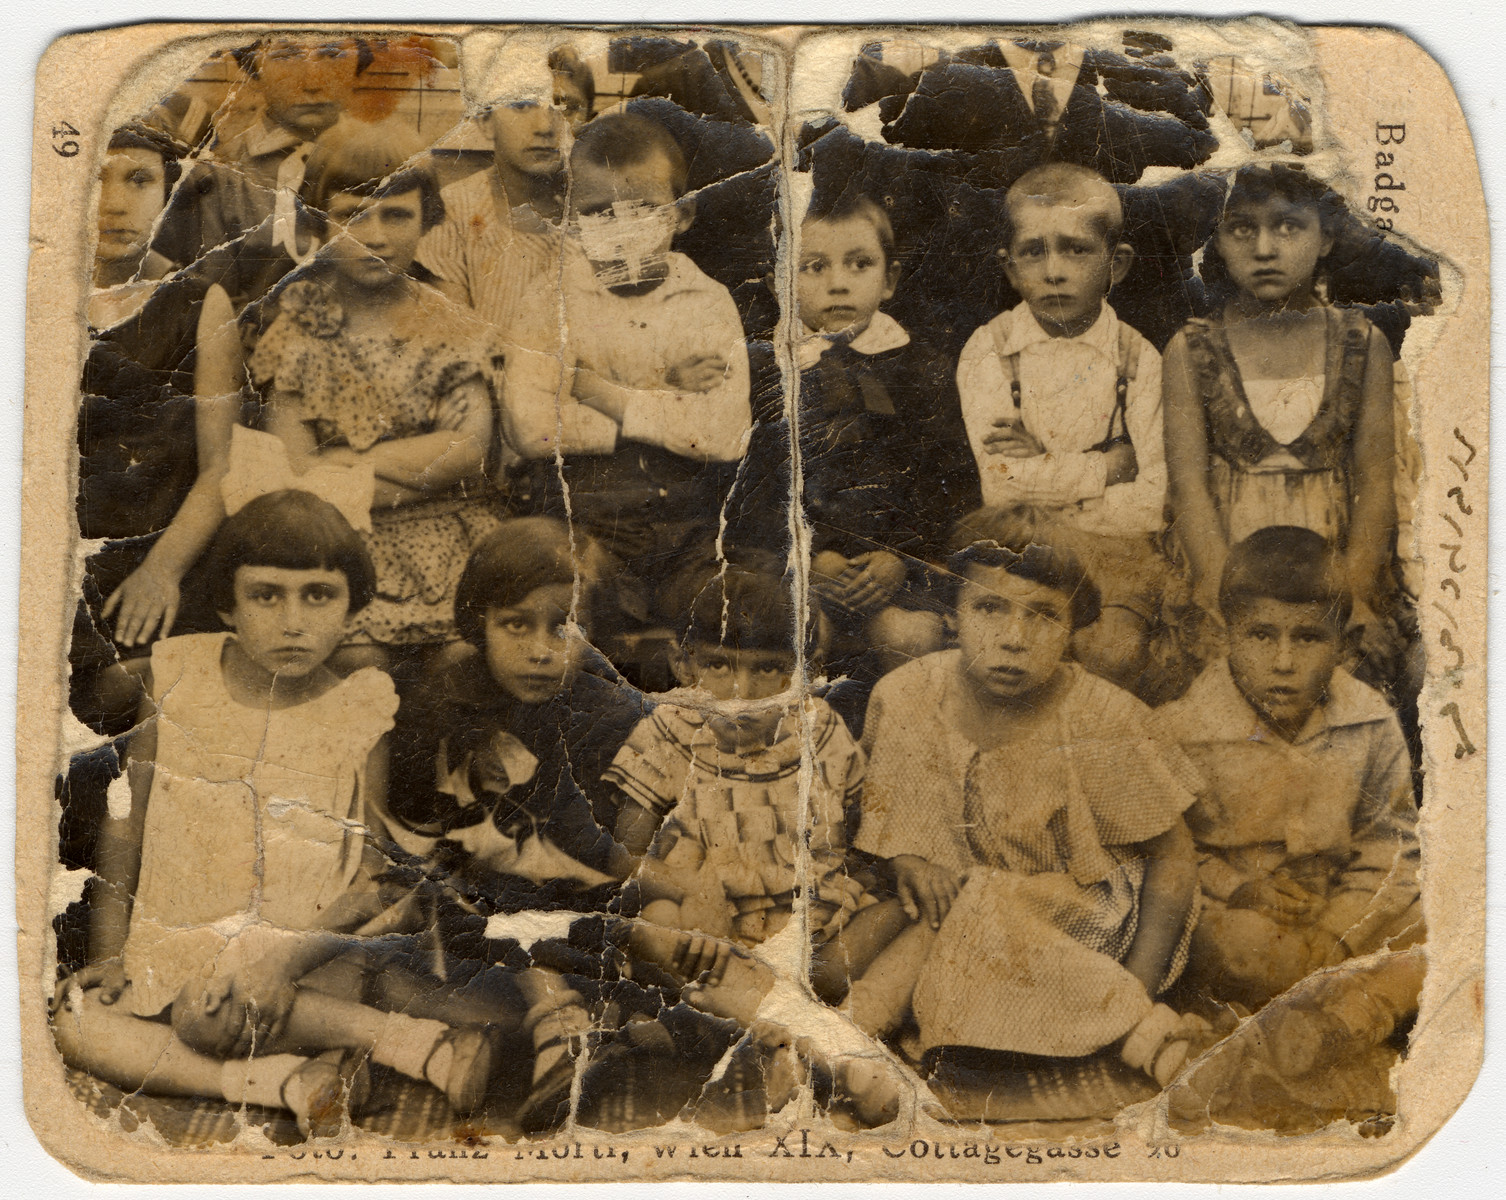 Group portrait of young children in a Jewish school in Nowogrodek.

Esther Ass is pictured in the front row, second from the left.